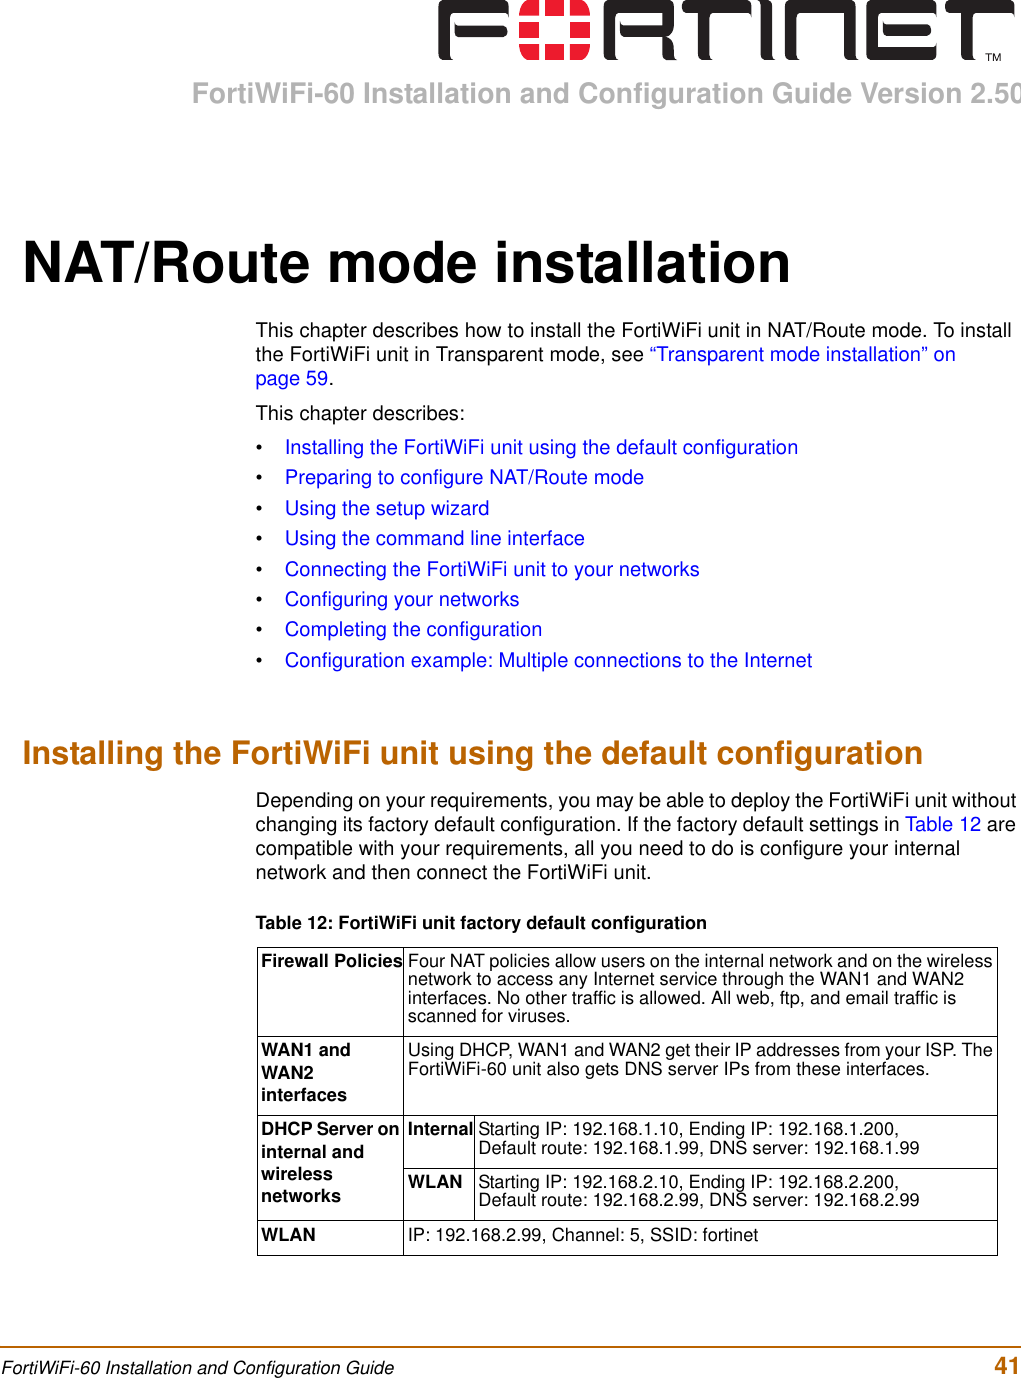 FortiWiFi-60 Installation and Configuration Guide Version 2.50FortiWiFi-60 Installation and Configuration Guide  41NAT/Route mode installationThis chapter describes how to install the FortiWiFi unit in NAT/Route mode. To install the FortiWiFi unit in Transparent mode, see “Transparent mode installation” on page 59.This chapter describes:•Installing the FortiWiFi unit using the default configuration•Preparing to configure NAT/Route mode•Using the setup wizard•Using the command line interface•Connecting the FortiWiFi unit to your networks•Configuring your networks•Completing the configuration•Configuration example: Multiple connections to the InternetInstalling the FortiWiFi unit using the default configurationDepending on your requirements, you may be able to deploy the FortiWiFi unit without changing its factory default configuration. If the factory default settings in Table 12 are compatible with your requirements, all you need to do is configure your internal network and then connect the FortiWiFi unit.Table 12: FortiWiFi unit factory default configurationFirewall Policies Four NAT policies allow users on the internal network and on the wireless network to access any Internet service through the WAN1 and WAN2 interfaces. No other traffic is allowed. All web, ftp, and email traffic is scanned for viruses.WAN1 and WAN2 interfacesUsing DHCP, WAN1 and WAN2 get their IP addresses from your ISP. The FortiWiFi-60 unit also gets DNS server IPs from these interfaces.DHCP Server on internal and wireless networksInternal Starting IP: 192.168.1.10, Ending IP: 192.168.1.200,Default route: 192.168.1.99, DNS server: 192.168.1.99WLAN Starting IP: 192.168.2.10, Ending IP: 192.168.2.200,Default route: 192.168.2.99, DNS server: 192.168.2.99WLAN IP: 192.168.2.99, Channel: 5, SSID: fortinet